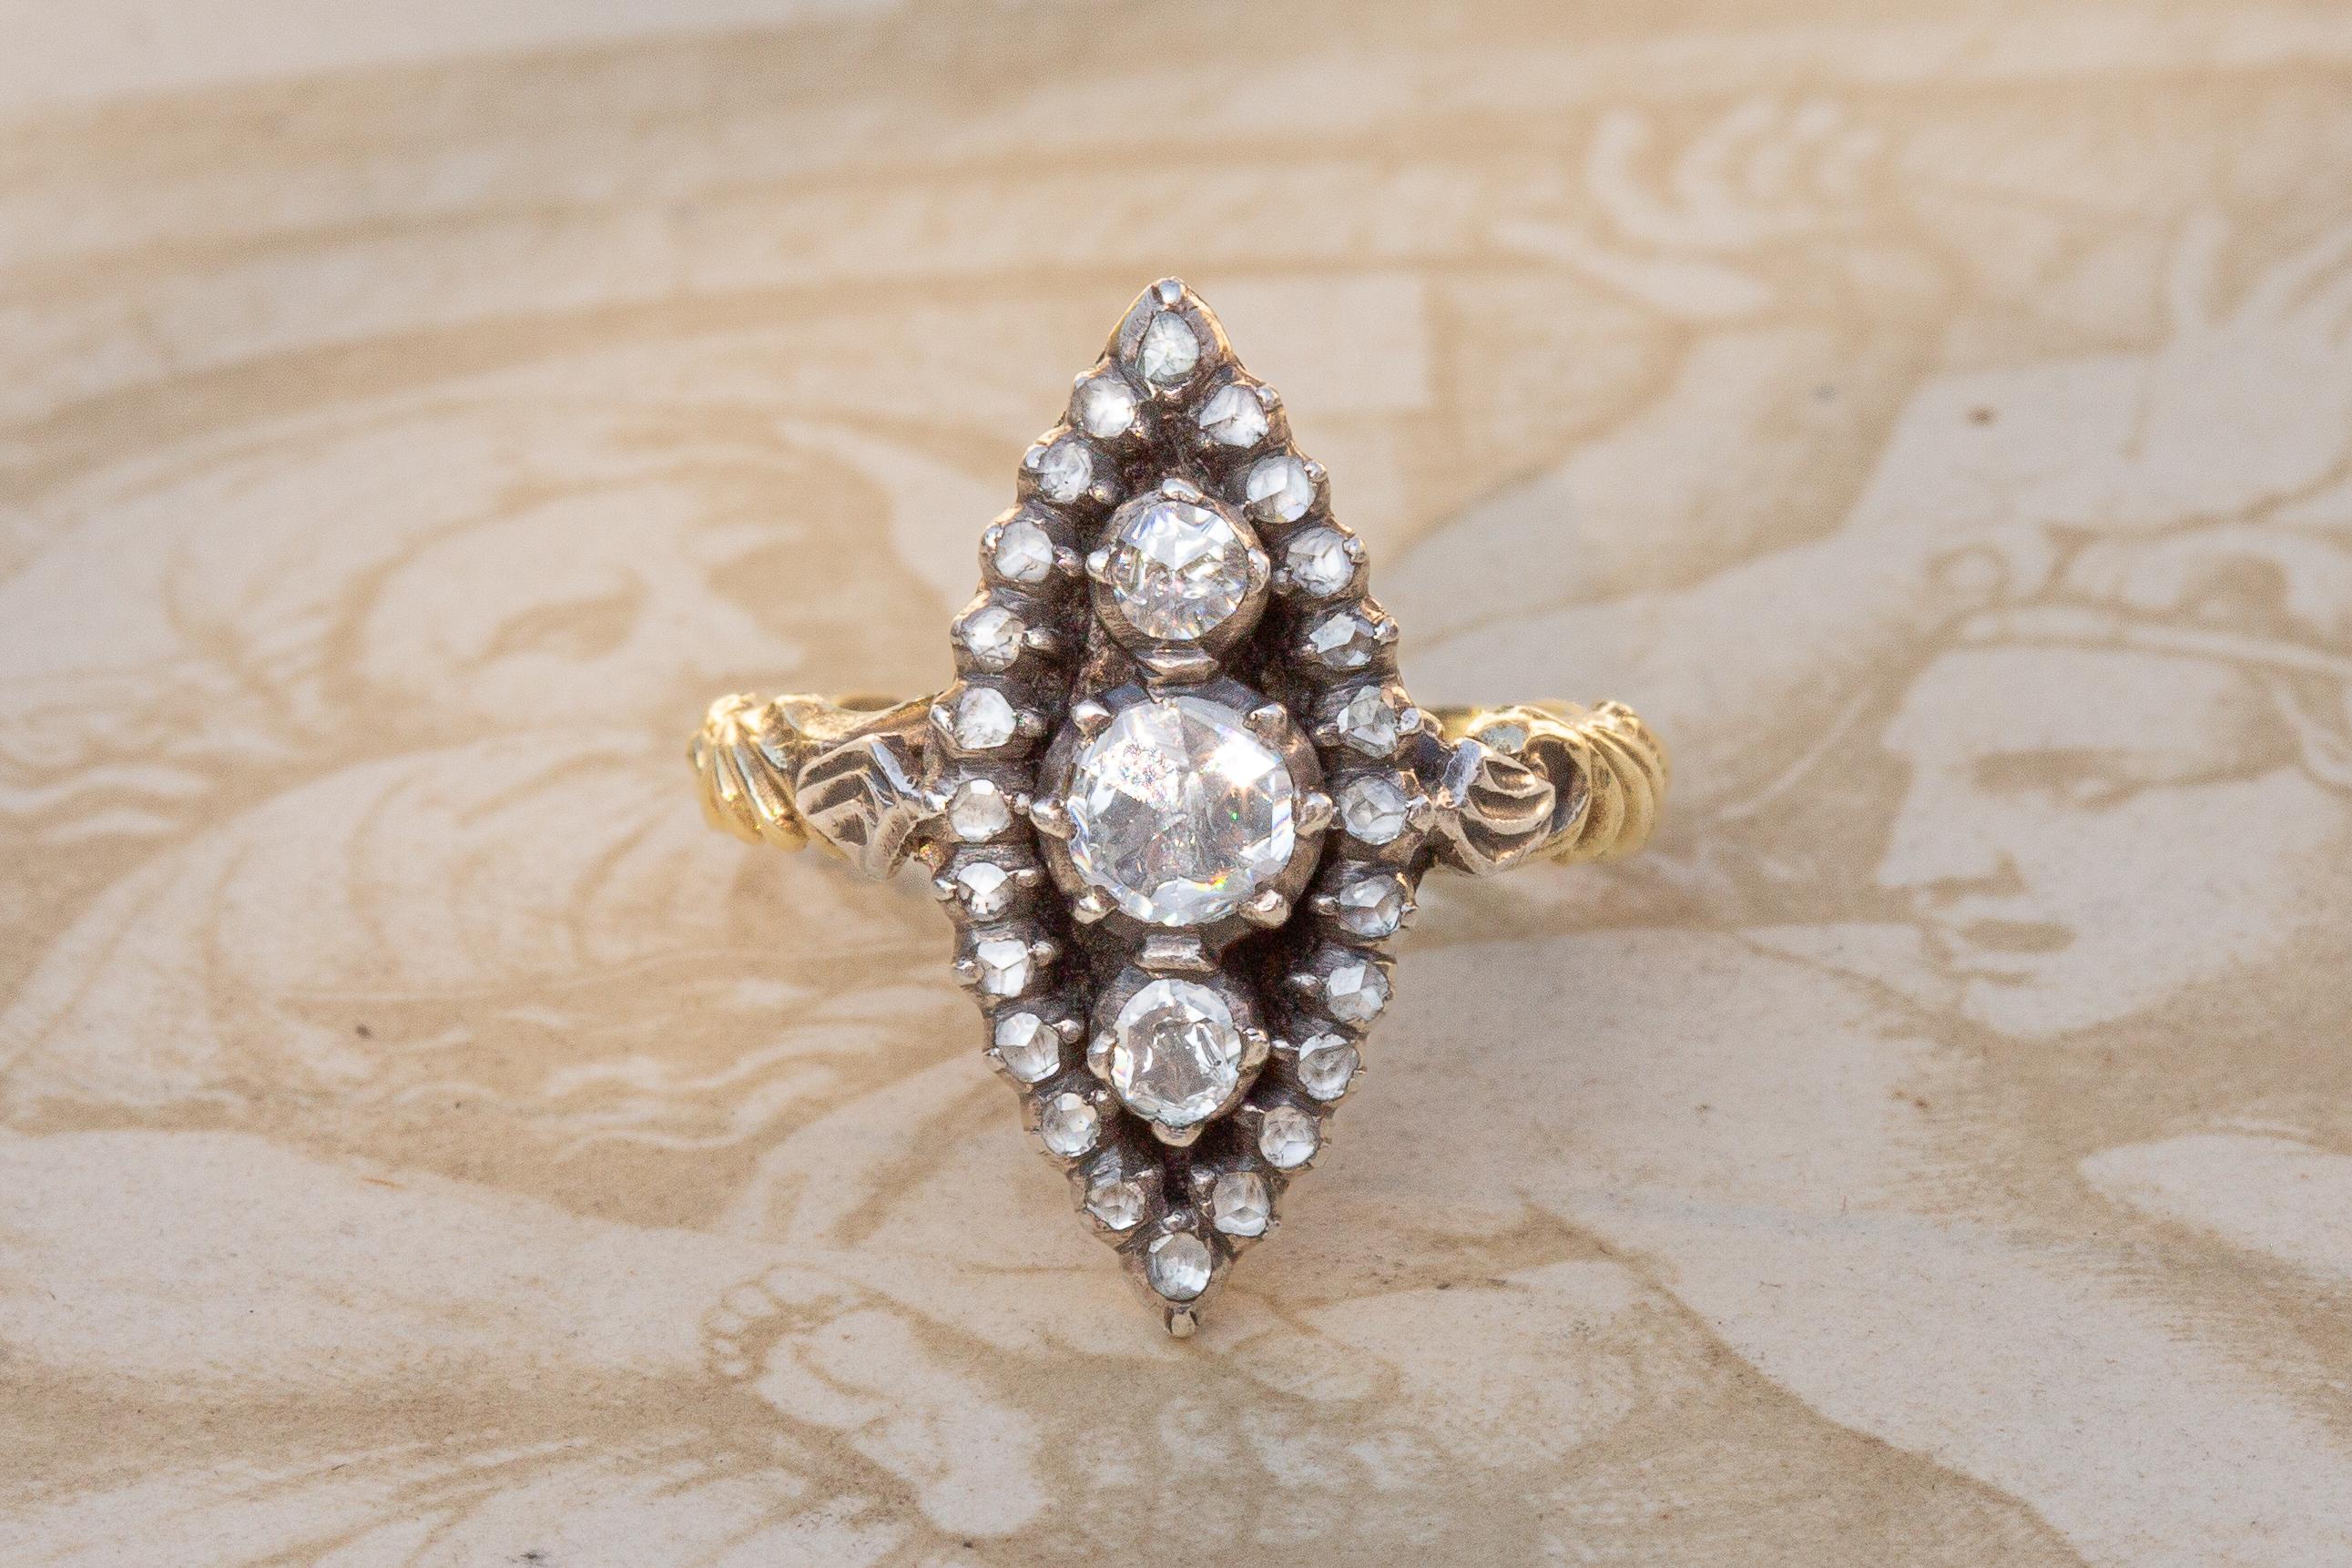 This gorgeous navette shaped cluster was made in the Netherlands and dates to around 1900. In the centre of the closed-back cluster are set three bright rose cut diamonds which exhibit lots of fire and sparkle. They are surrounded by a halo of